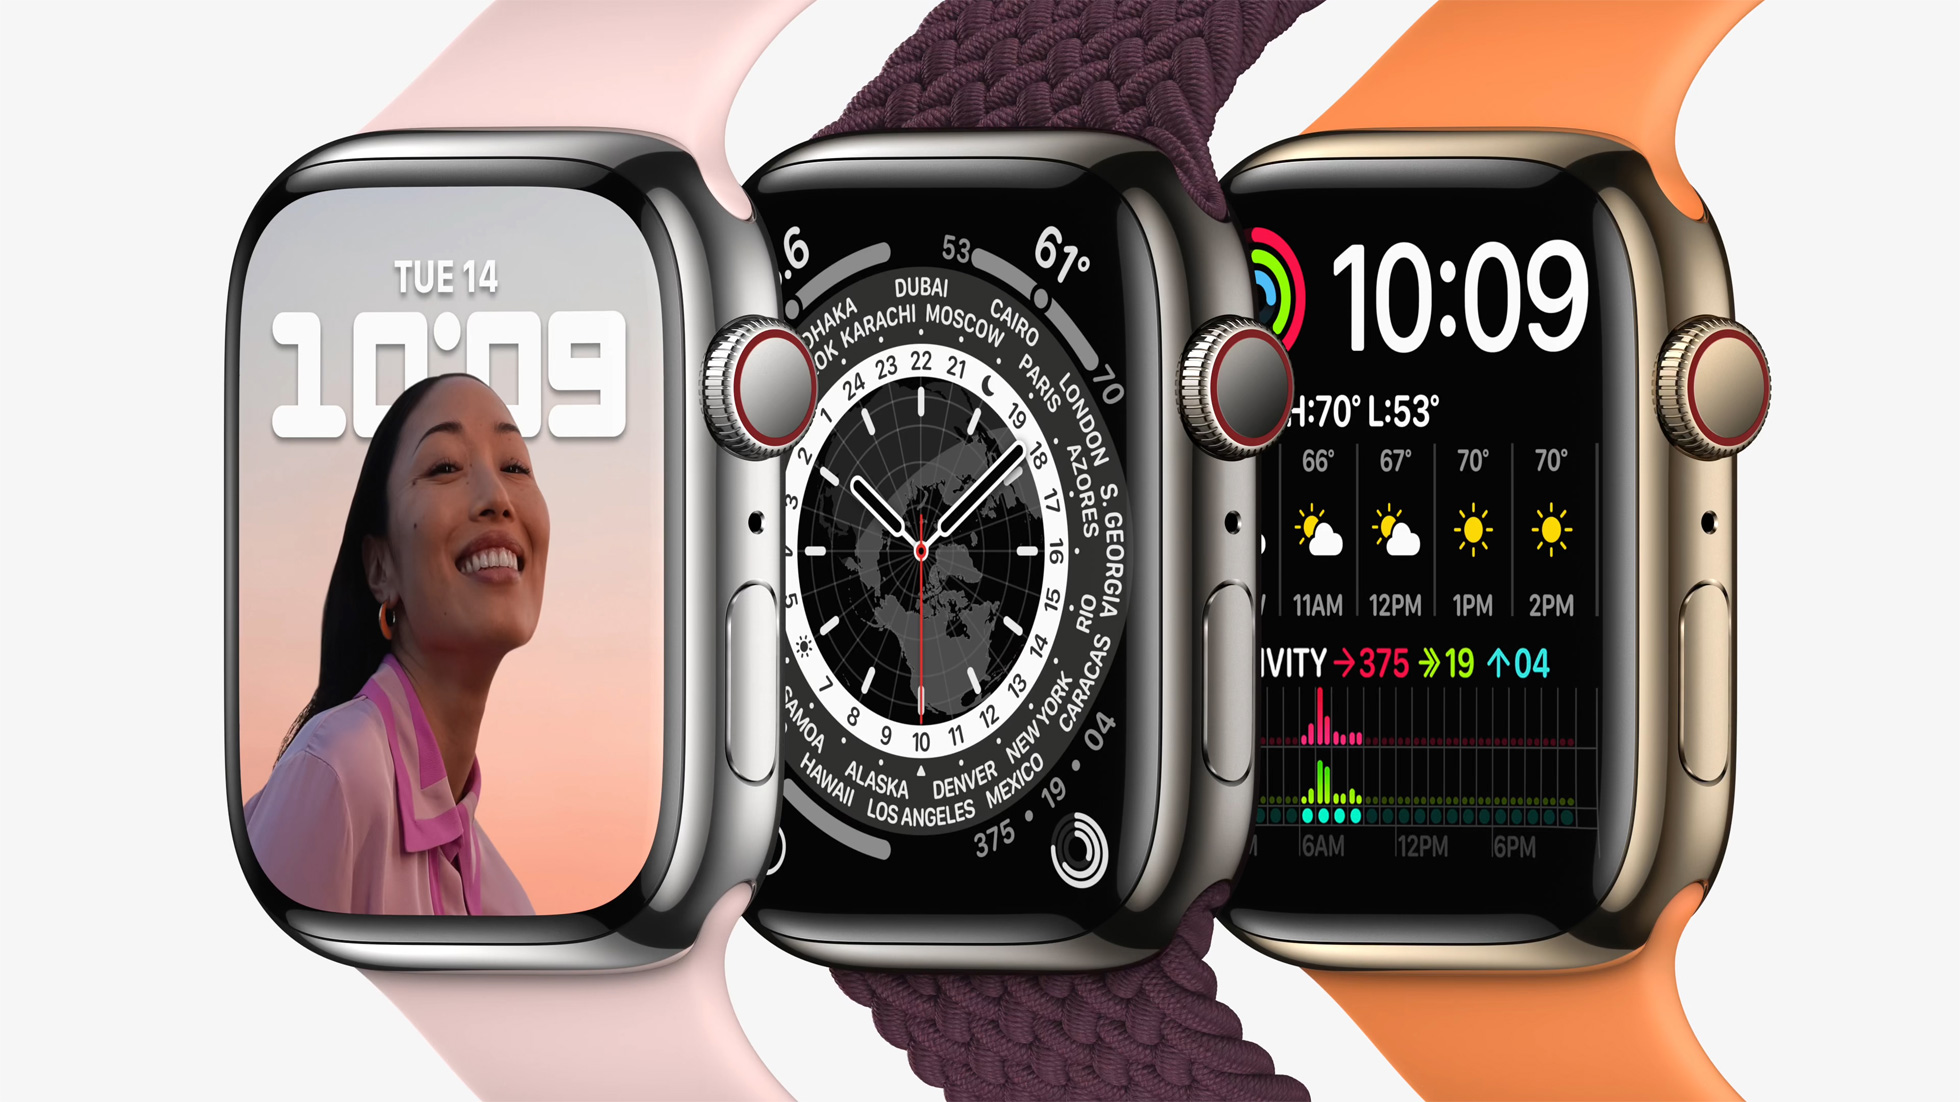 Apple Watch Series 7 lineup is arriving in stores on Friday, October 15